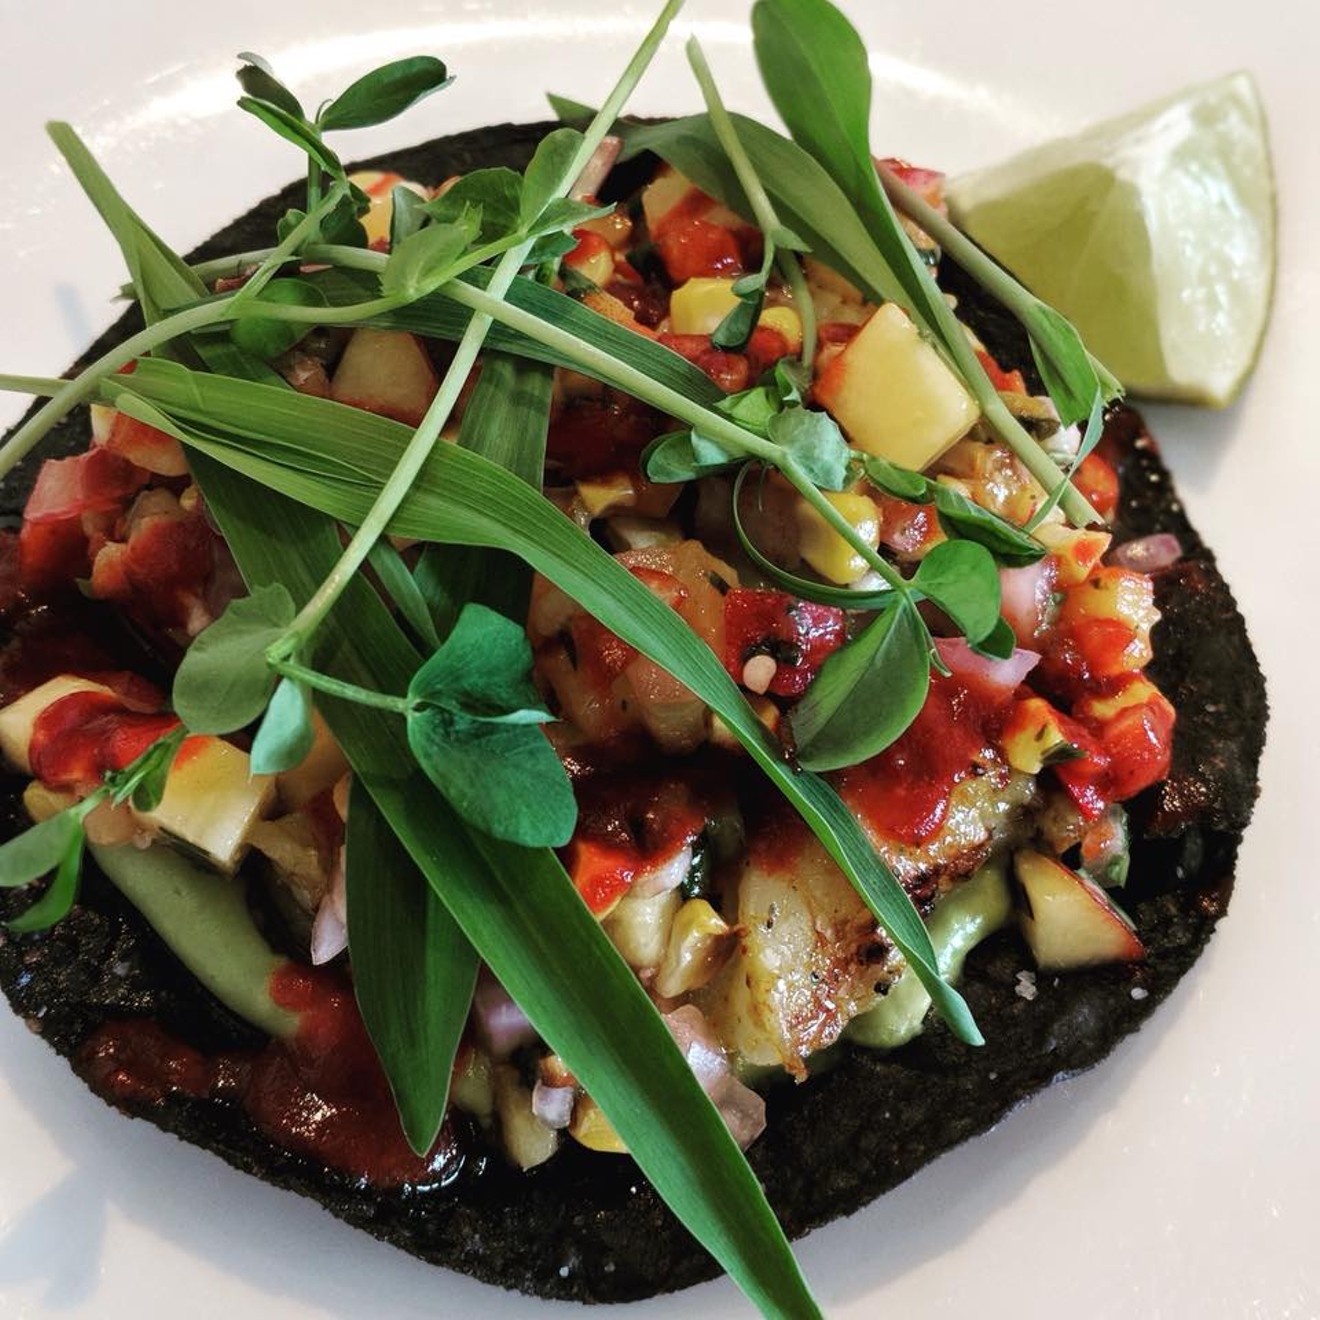 Santo uses blue corn tortillas from Abbondanza for its tostadas and tacos.